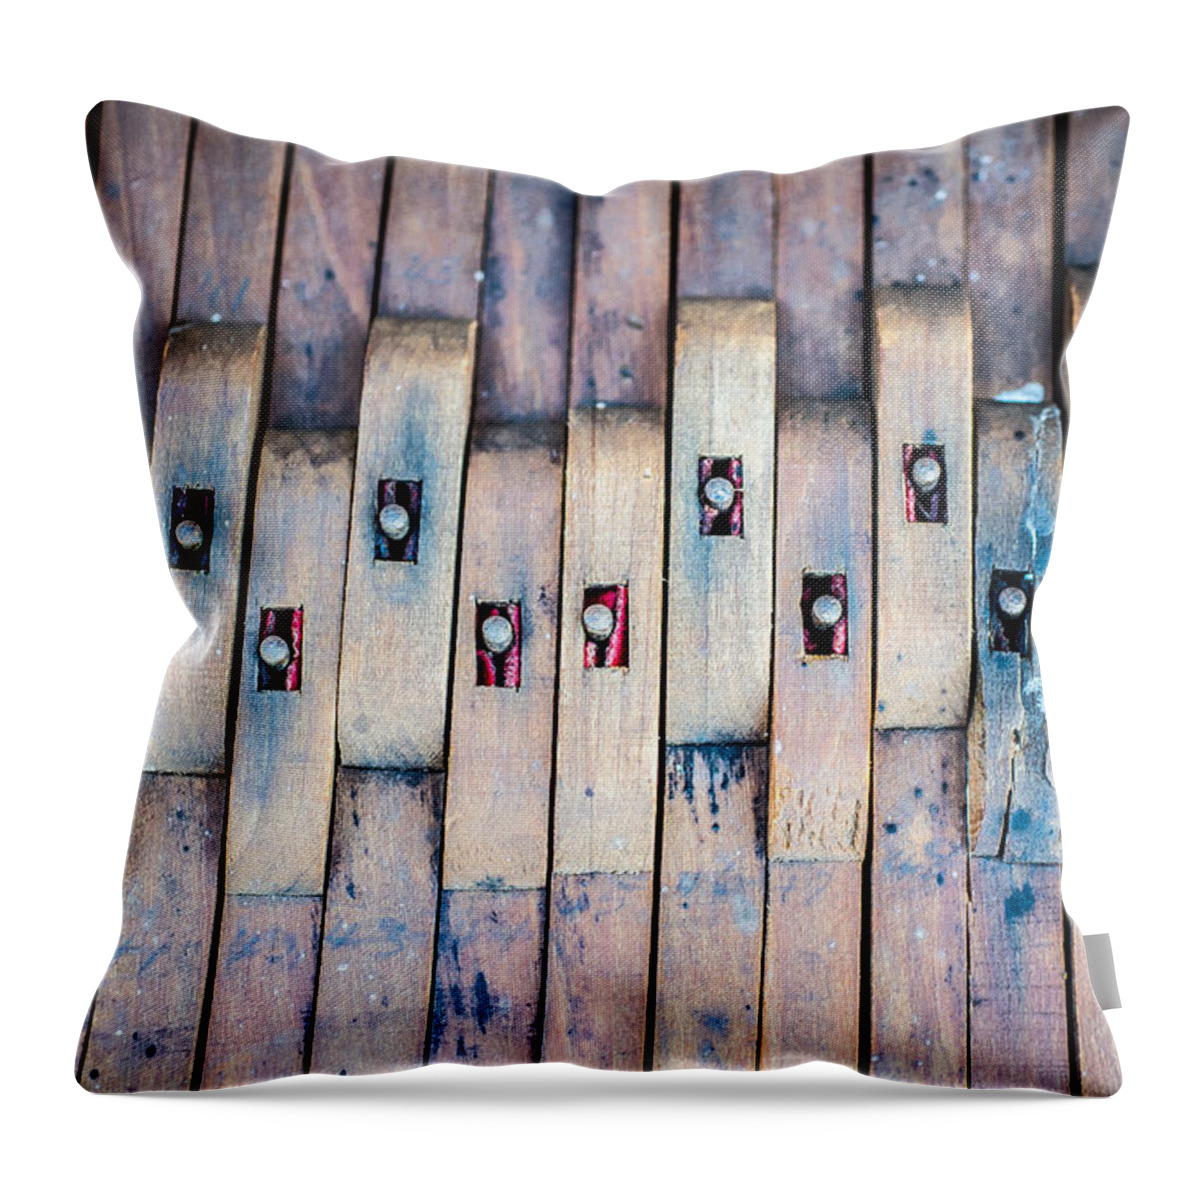 Piano Throw Pillow featuring the photograph Fulcrum 2 by David Downs